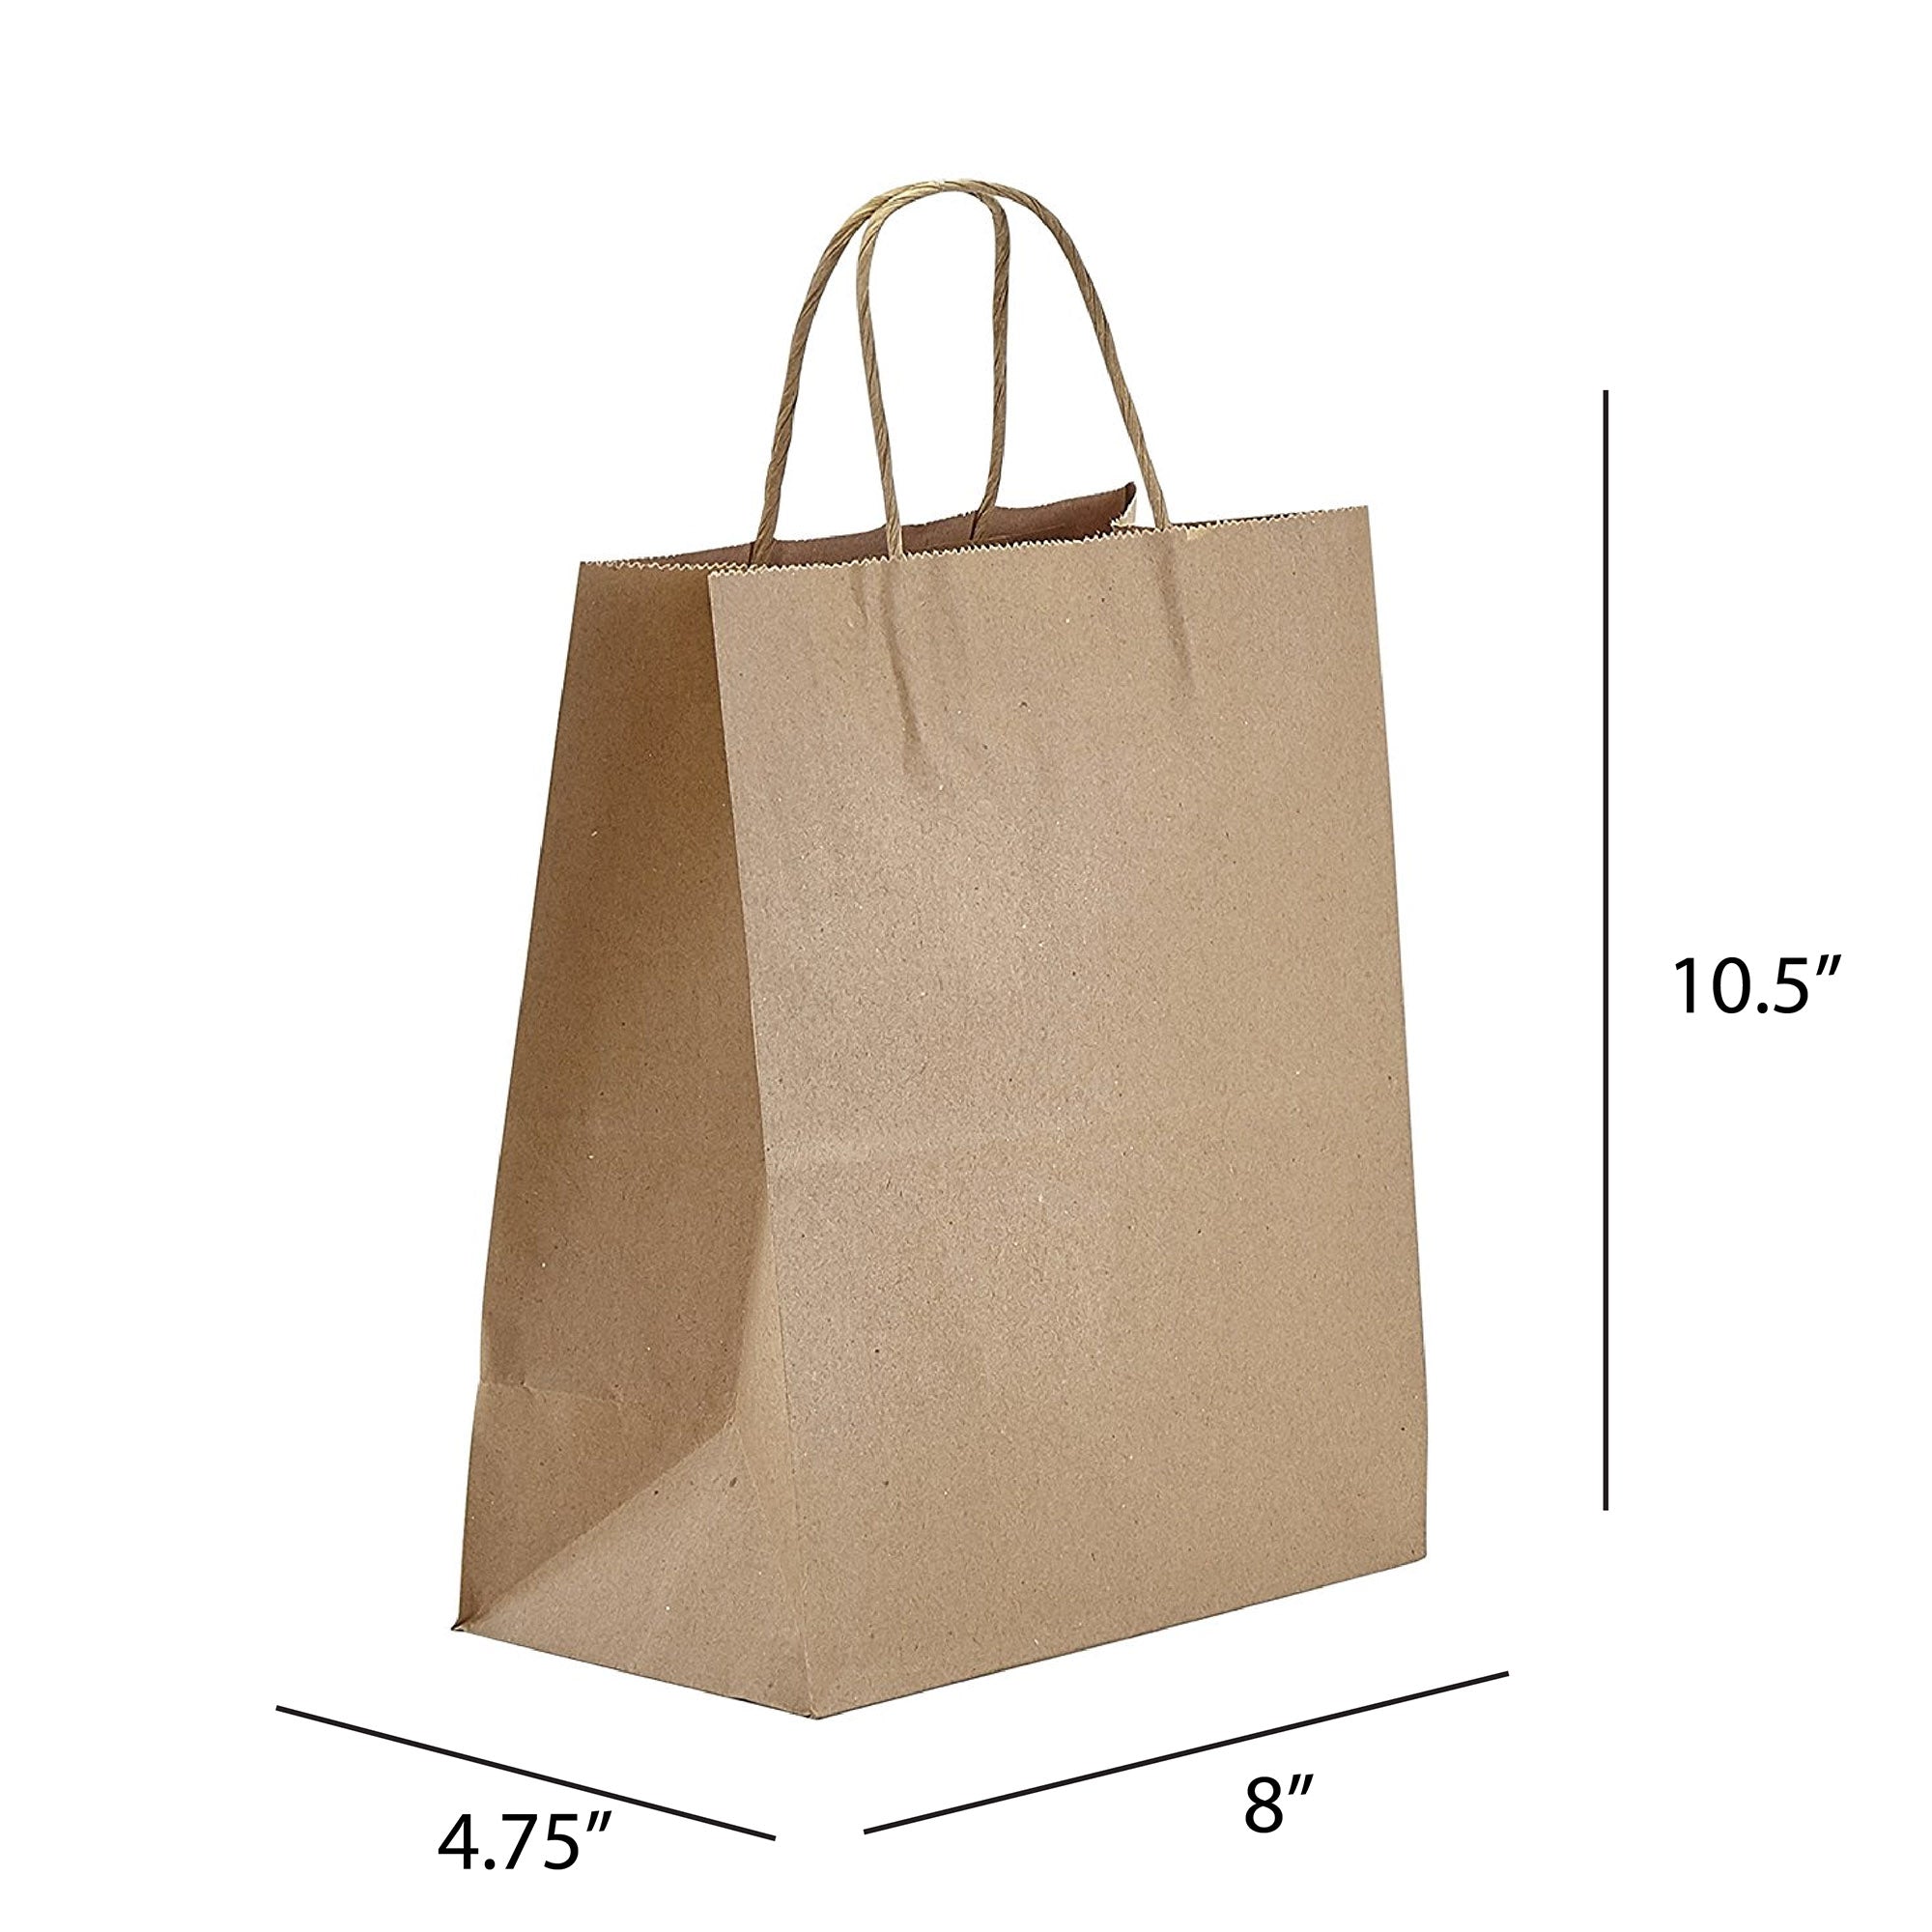 Brown Paper Bags With Handles – Kraft Shopping Bags, Bulk Gift Bags,  Delivery Catering Bags, Merchandise, Retail Food Service, Small Or Large |  islamiyyat.com